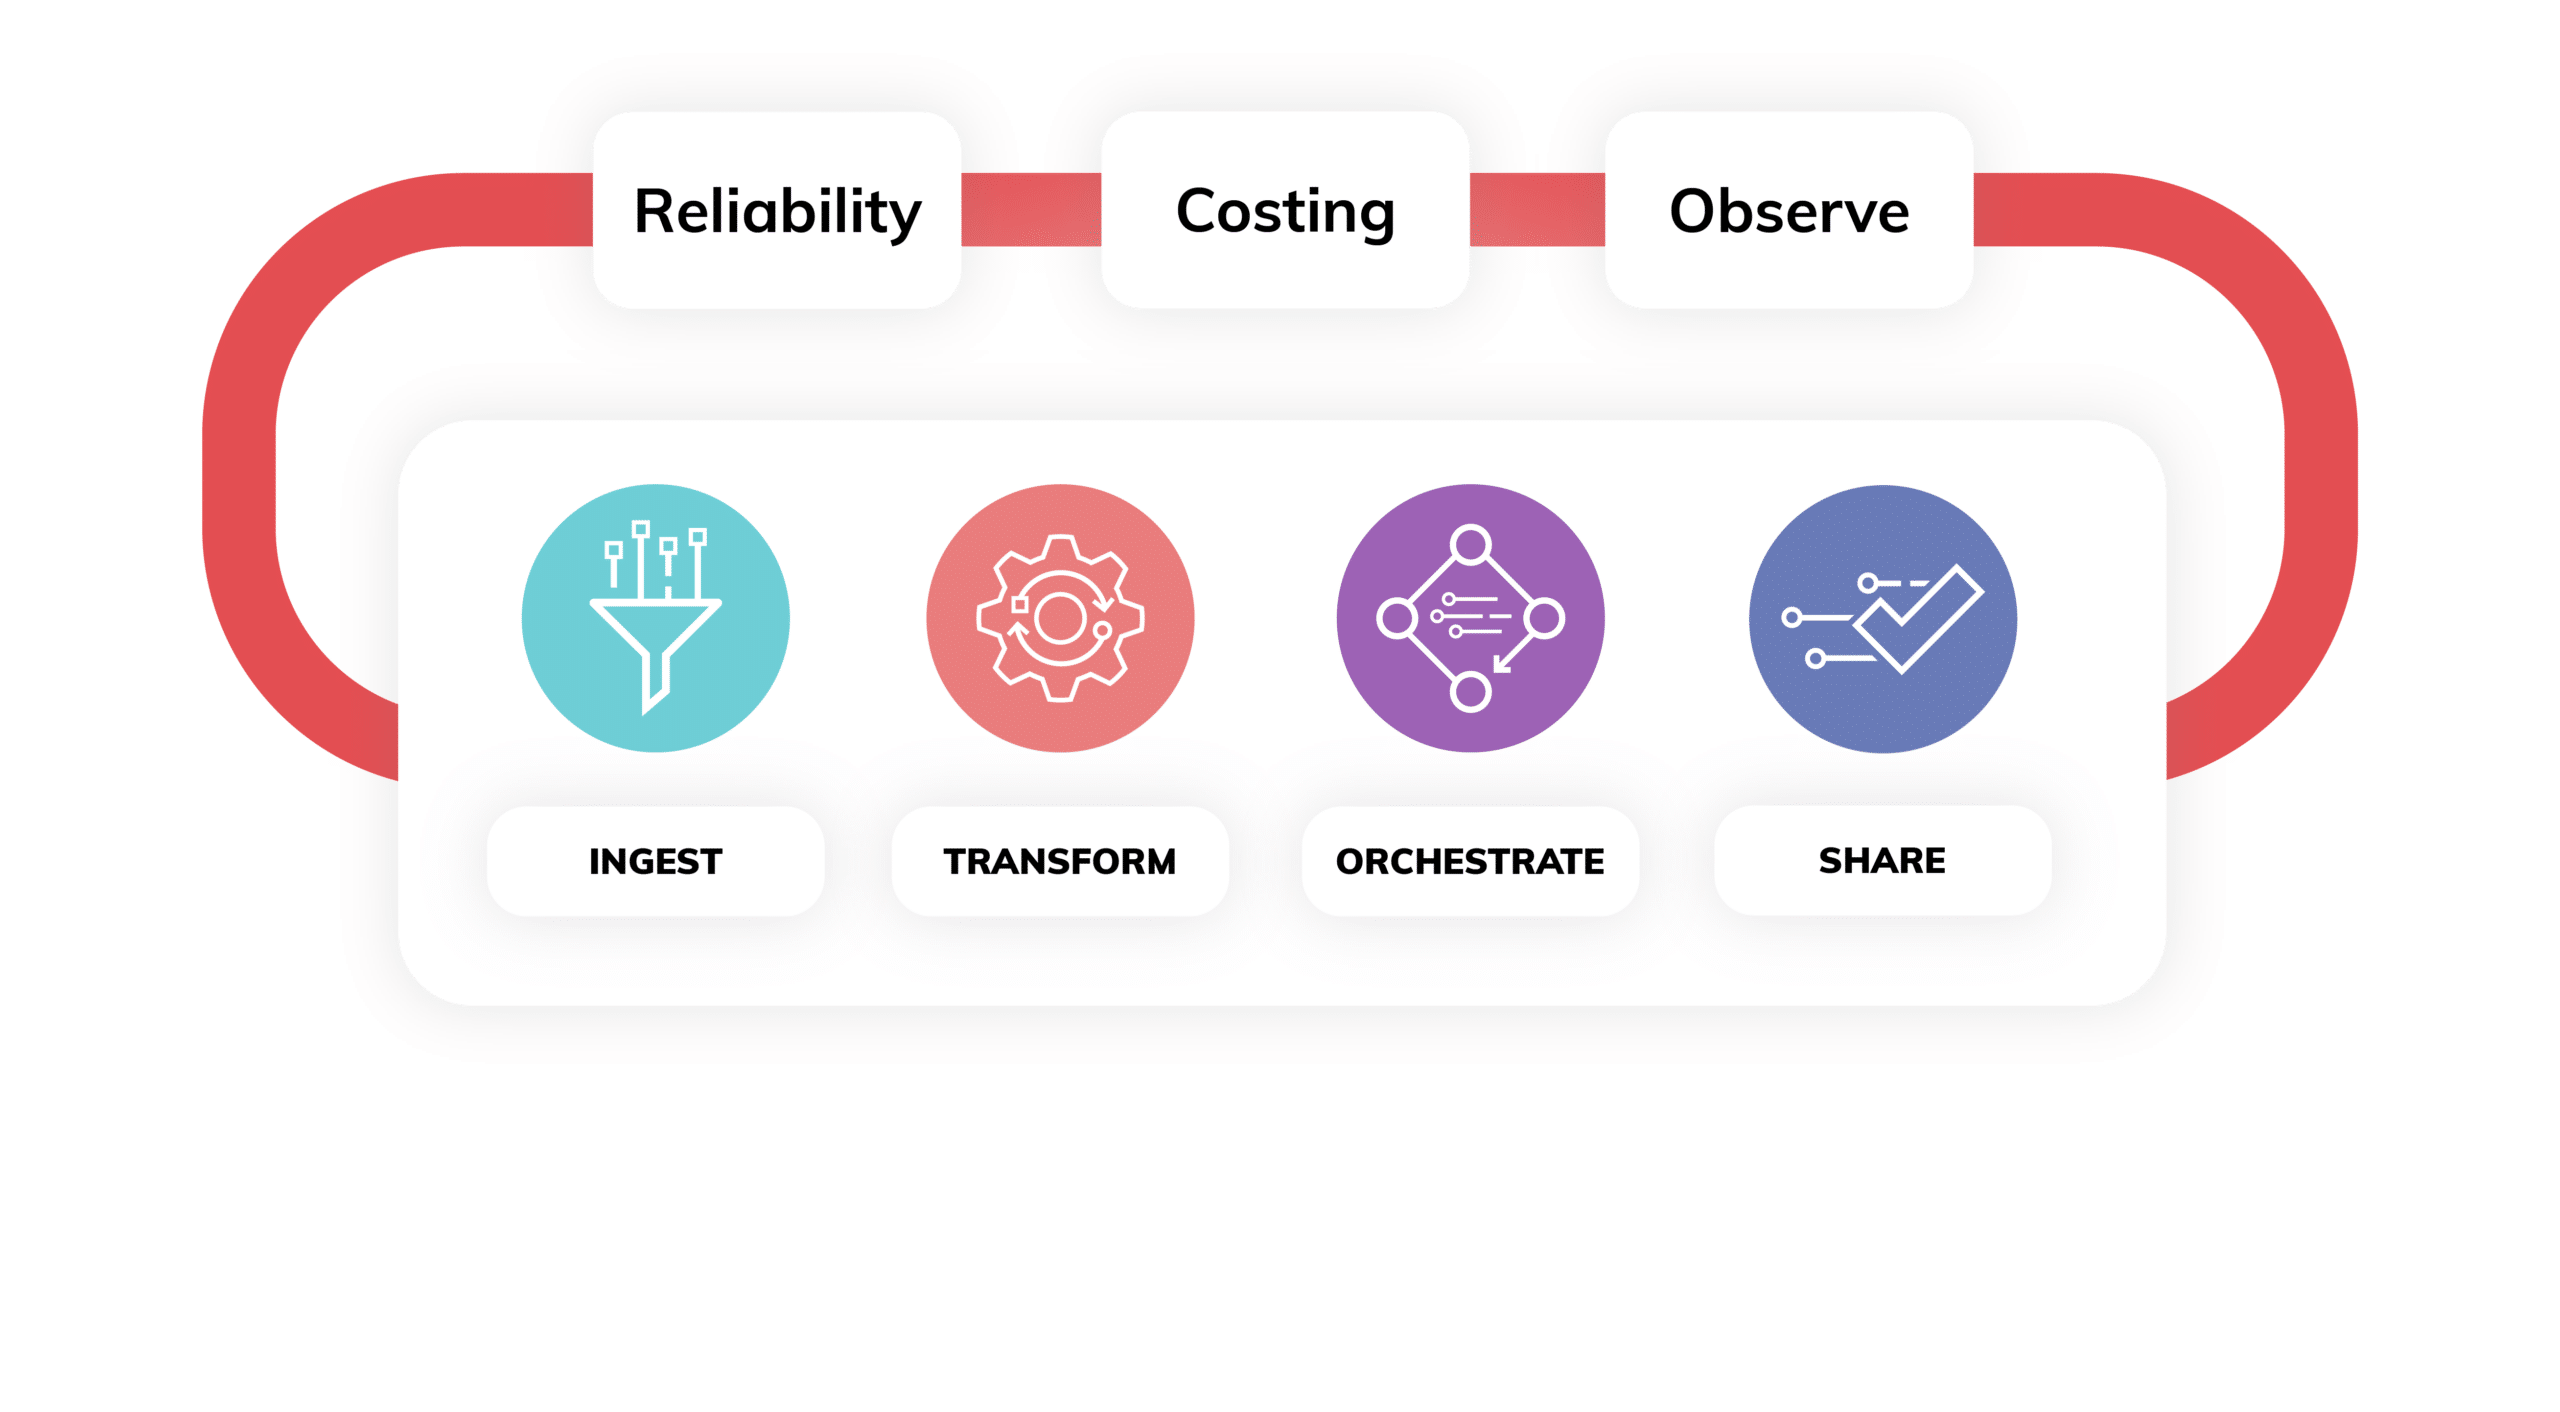 Visual representation of Ascend's unified dataops plane for reliability, costing, and observability of your data pipelines.